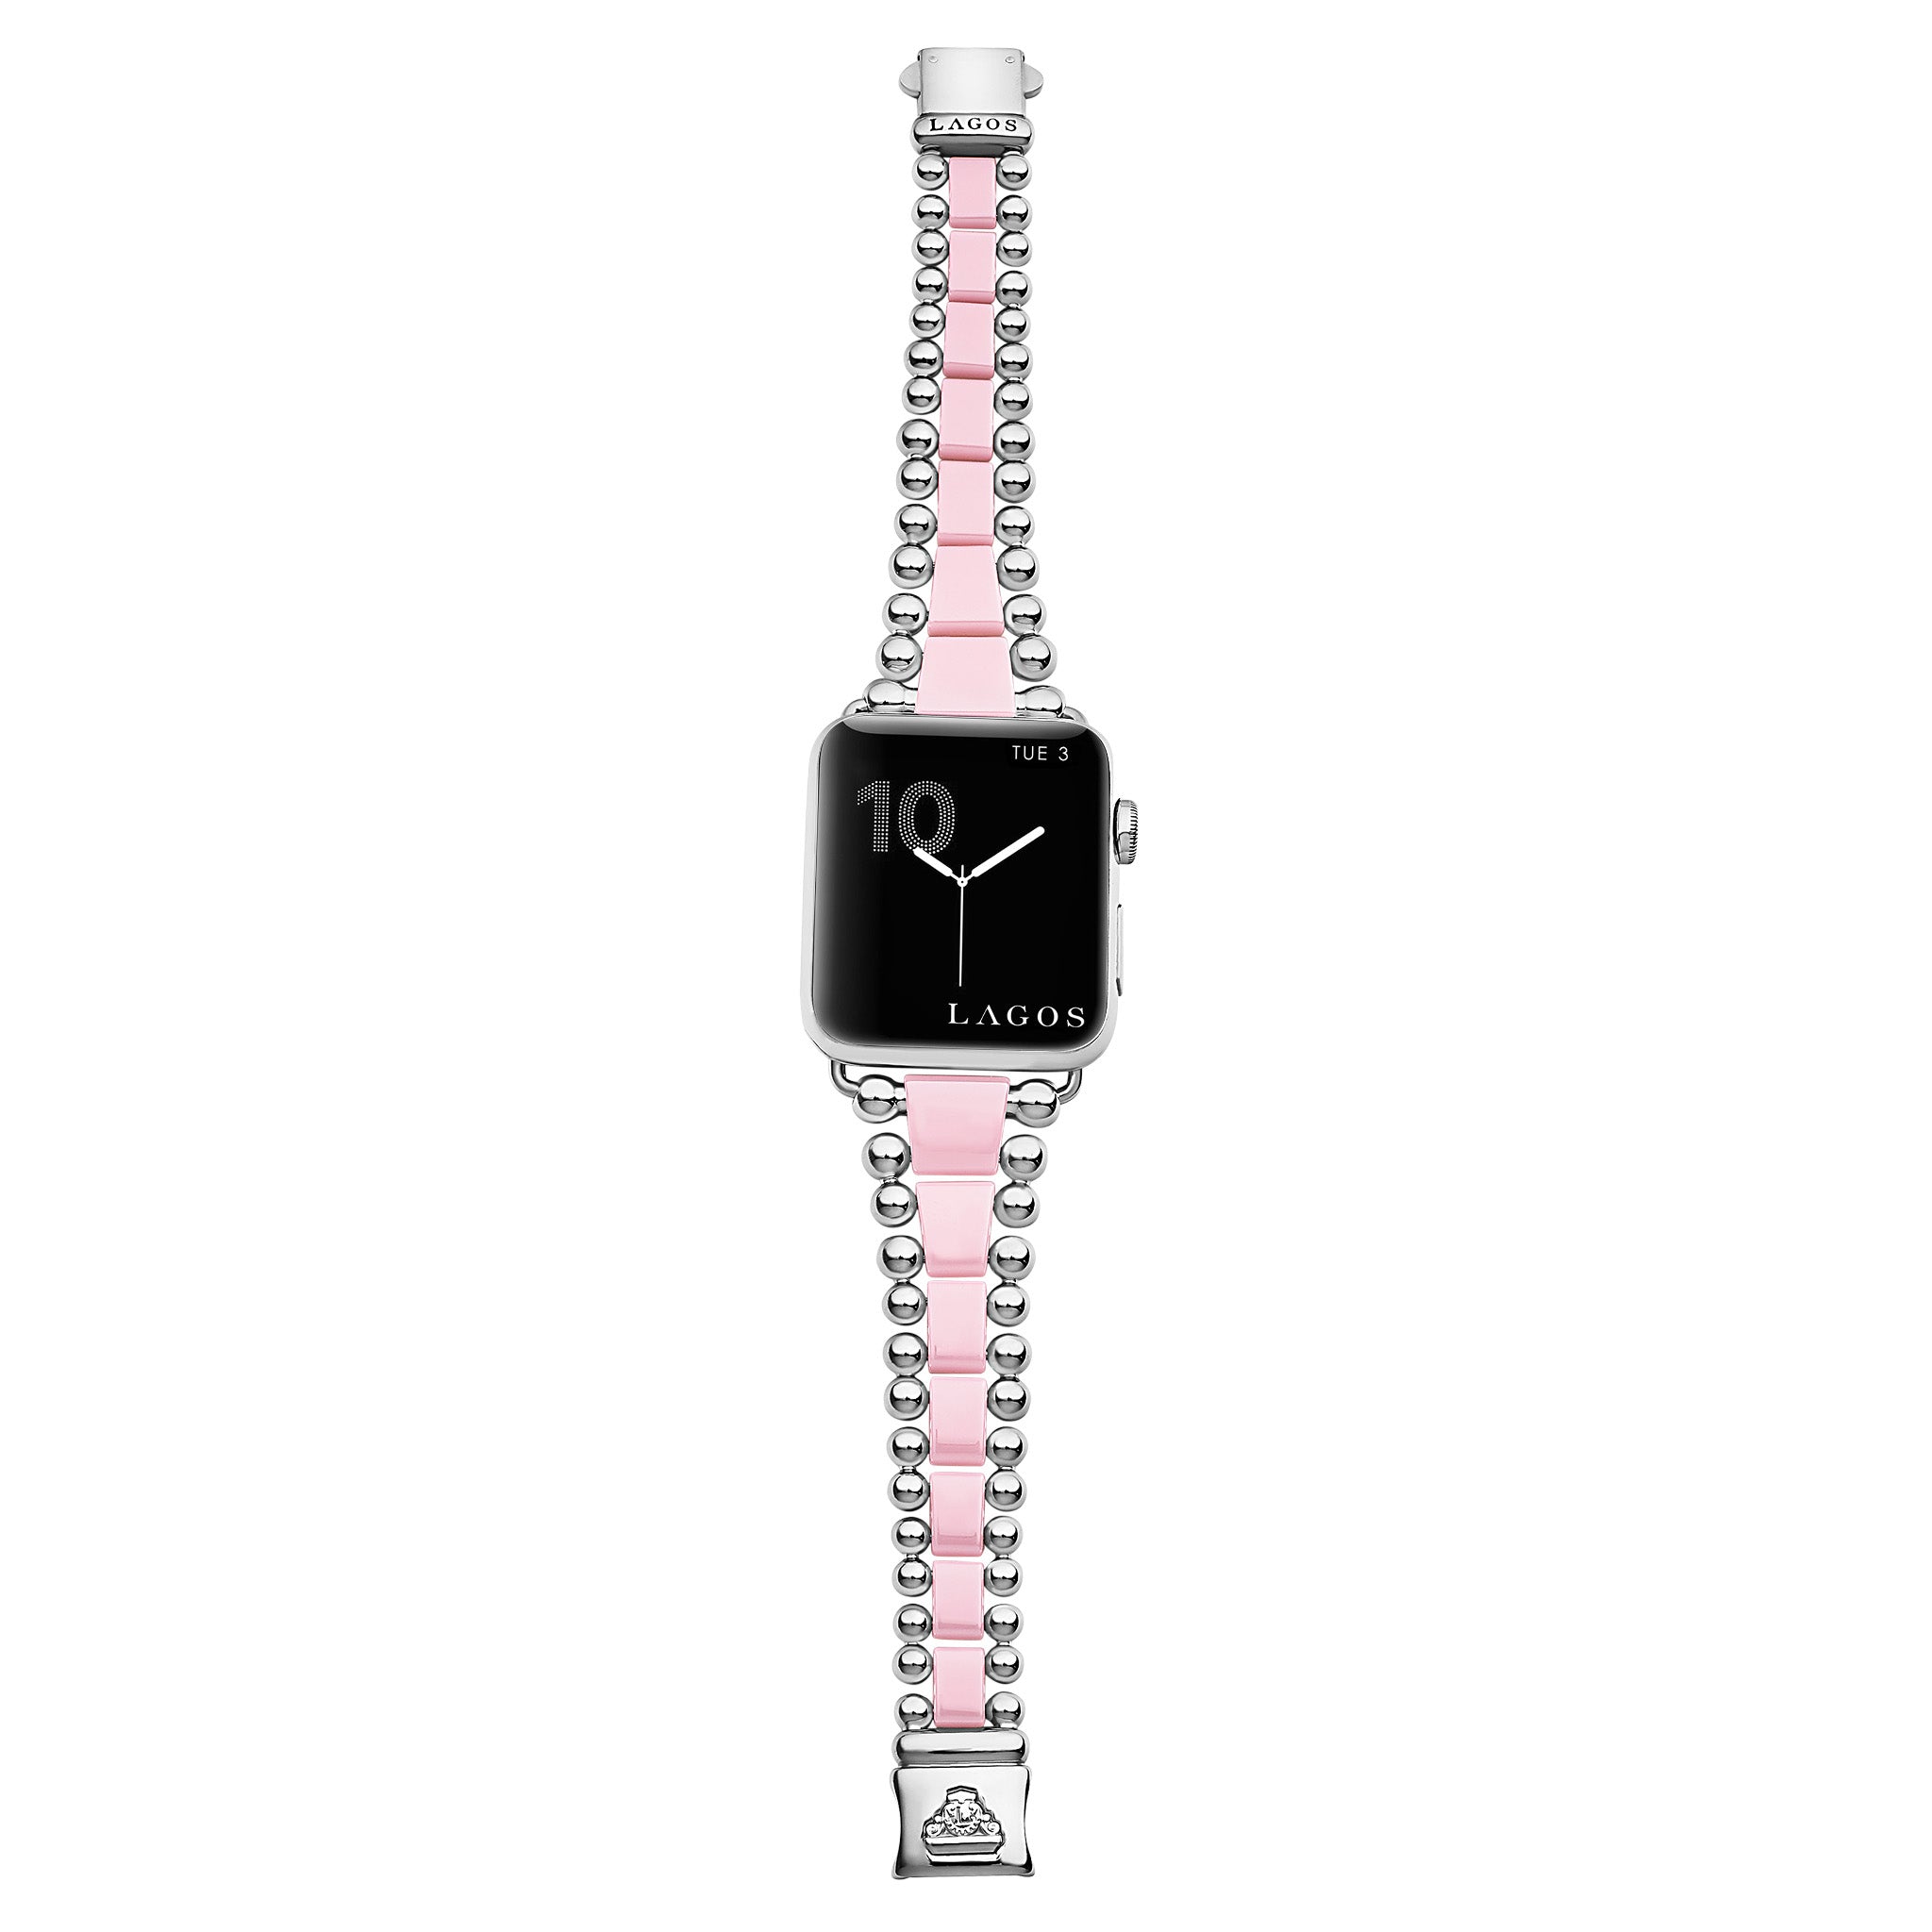 Light Pink Apple Watch Band for 42mm/44mm by Velvet Caviar